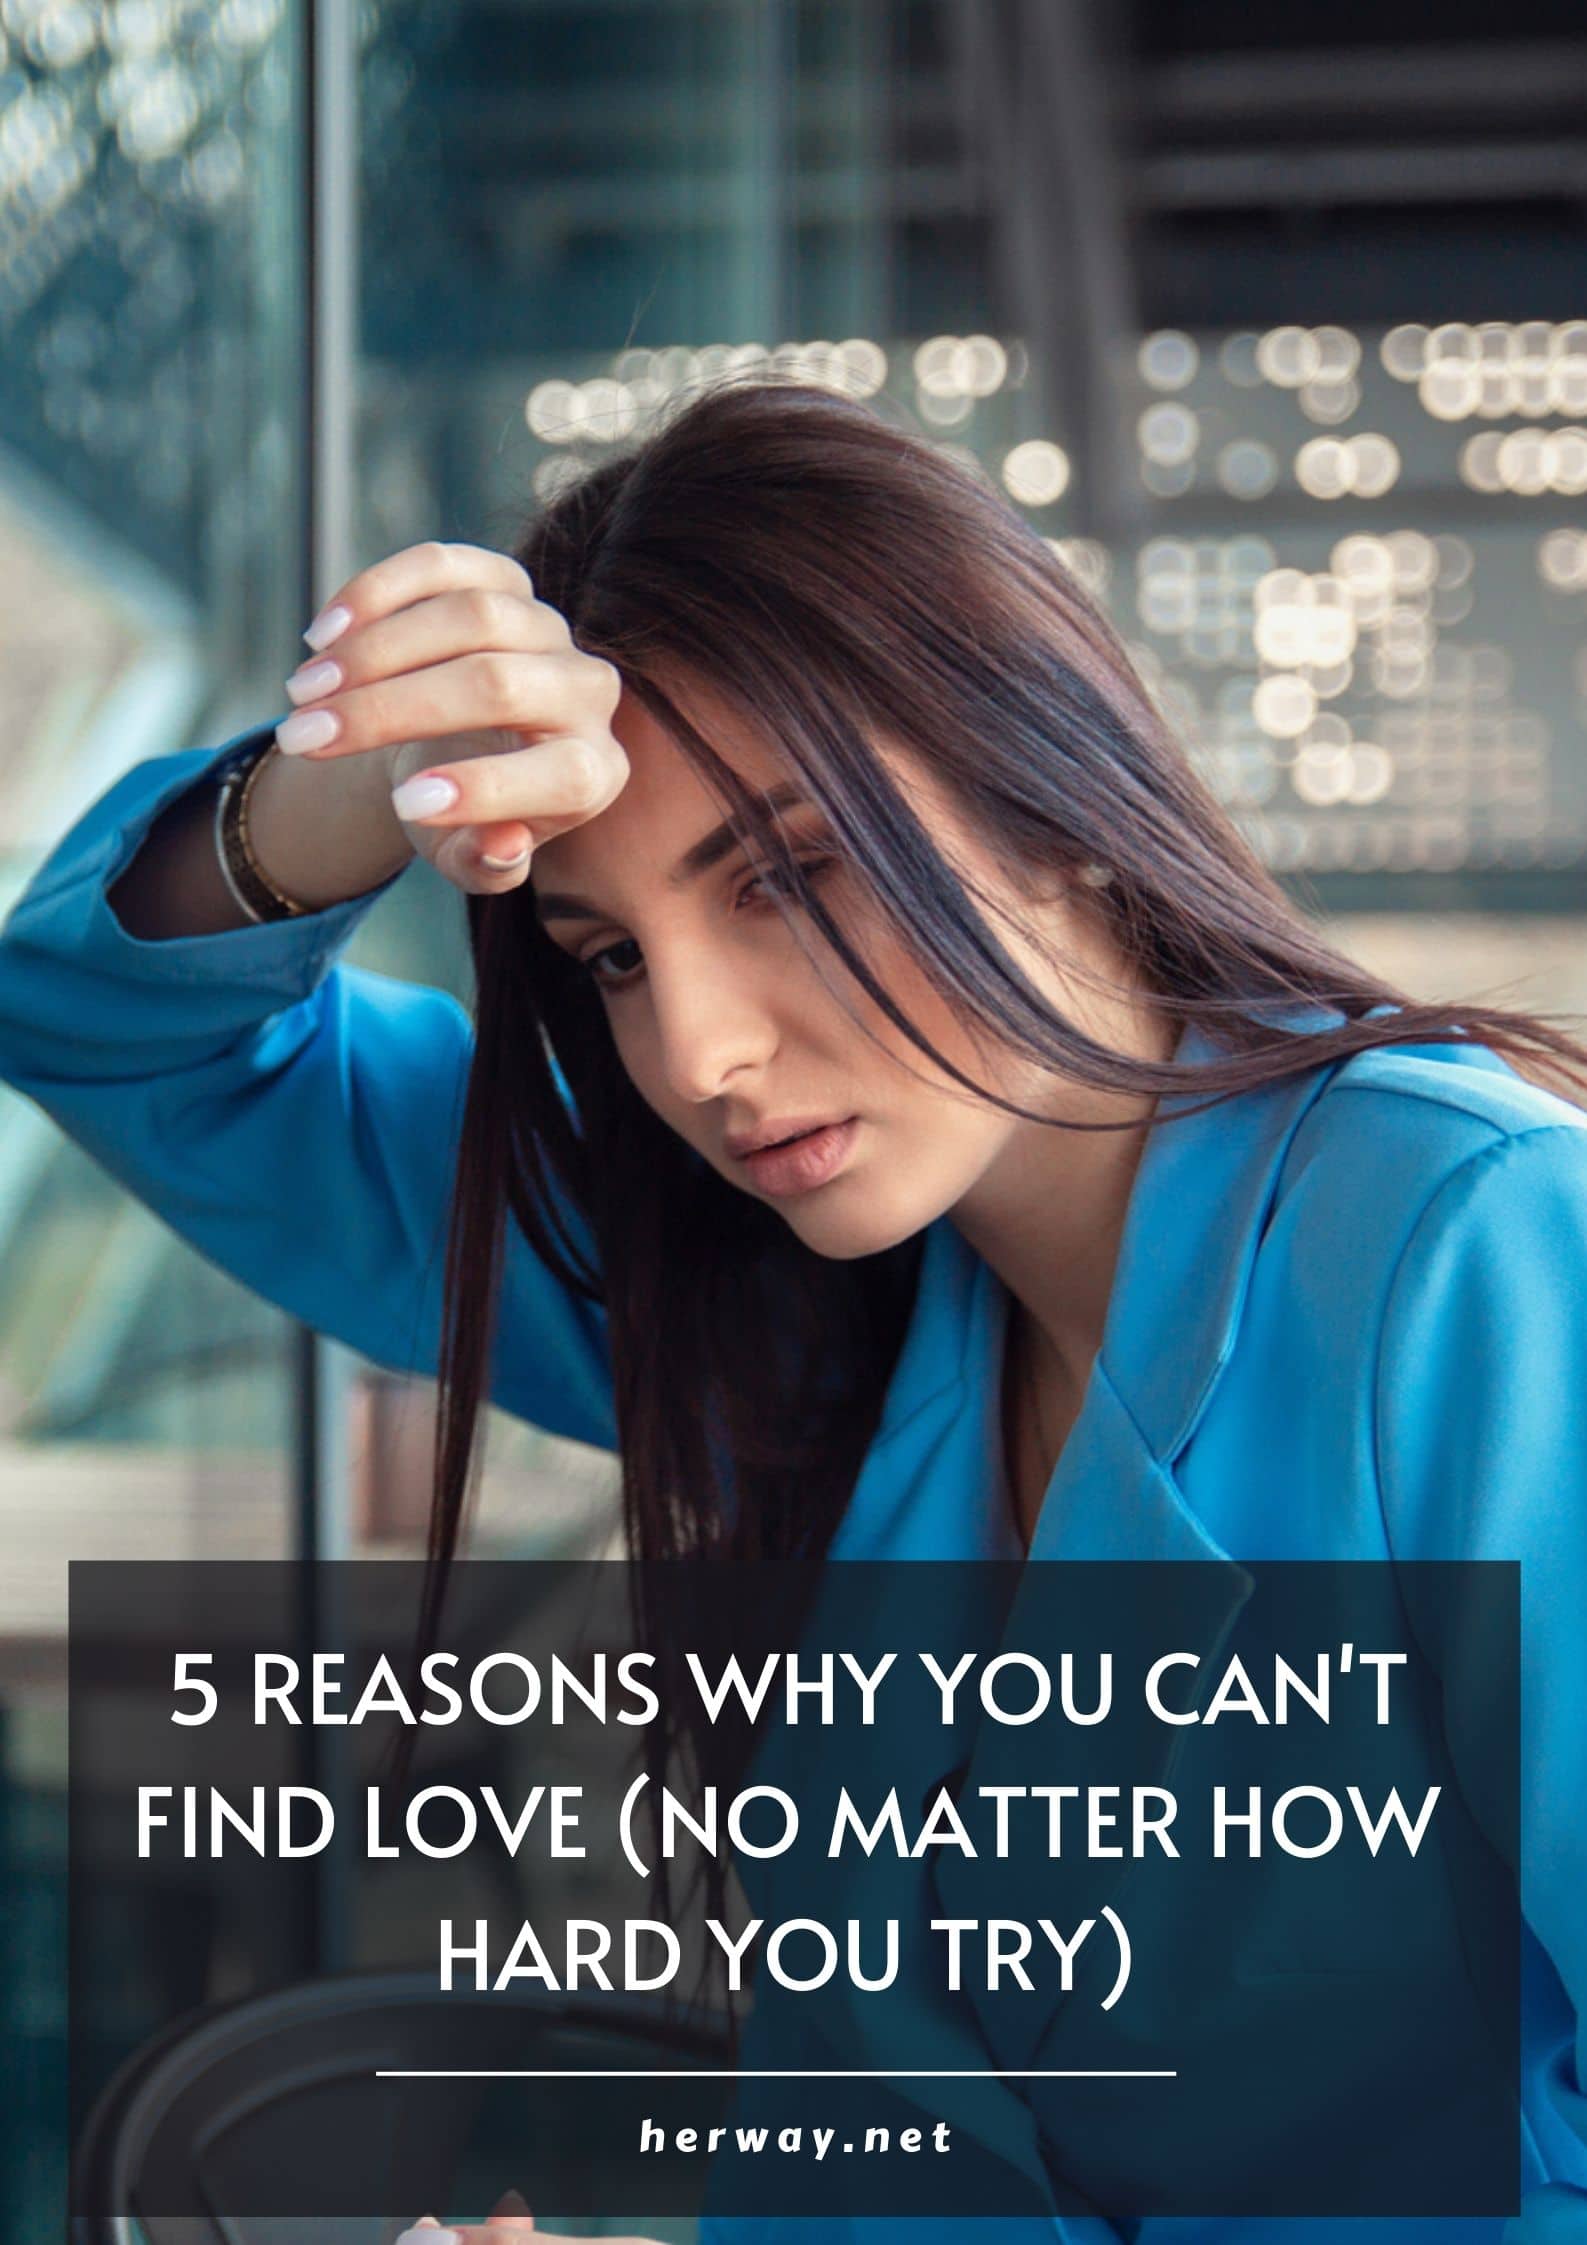 5 Reasons Why You Can't Find Love (No Matter How Hard You Try)